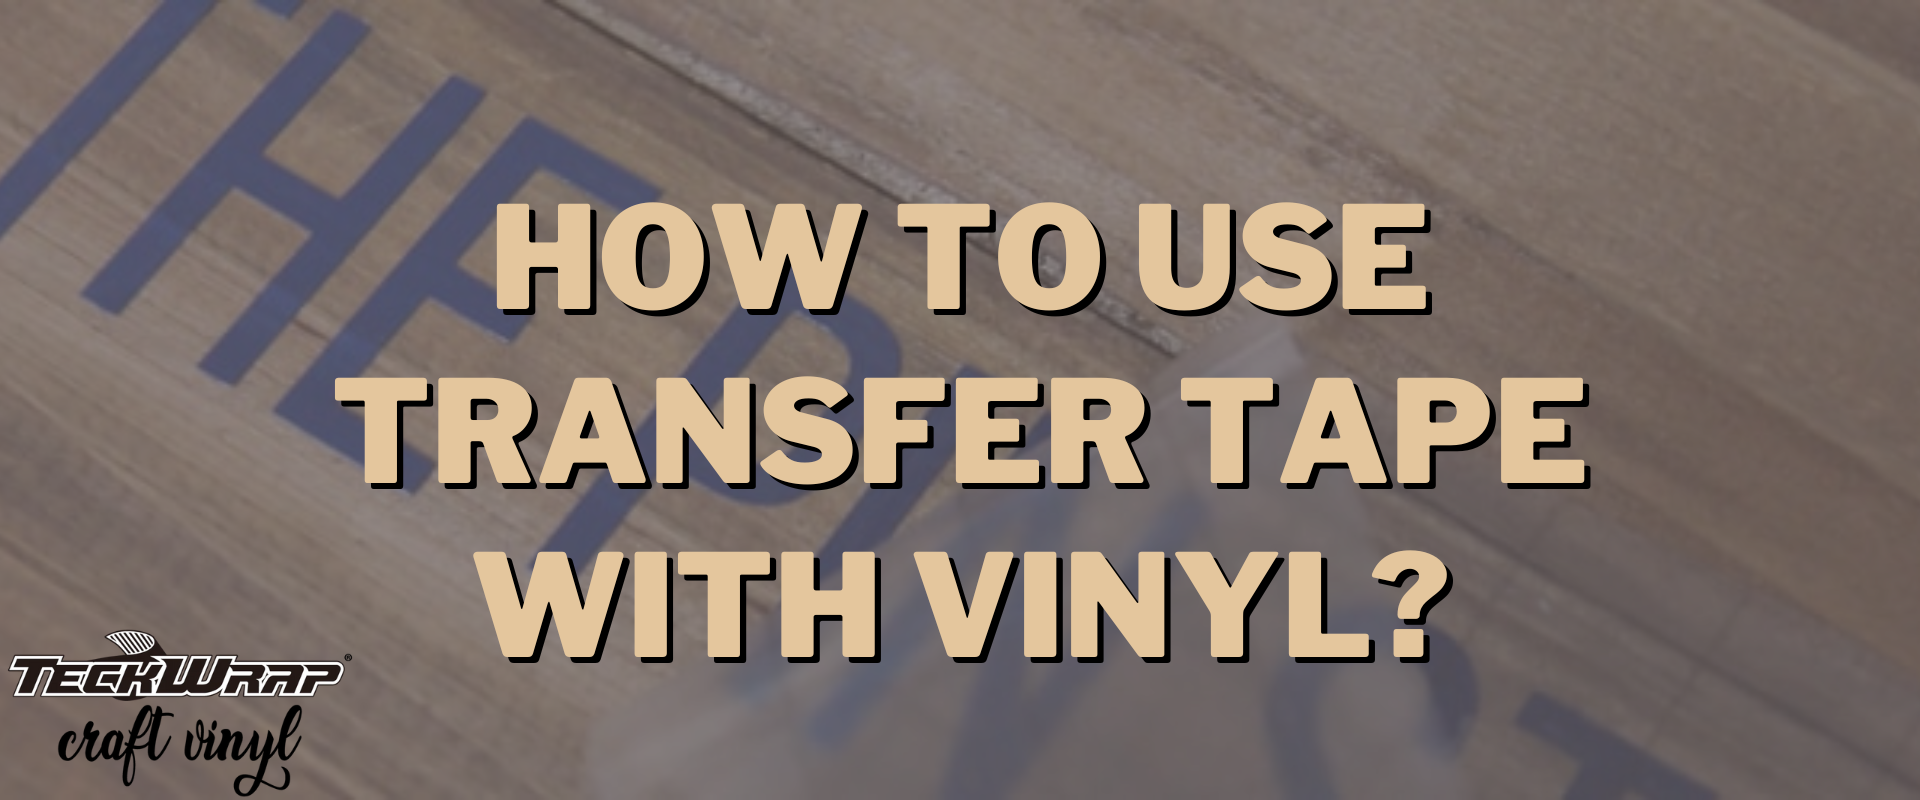 How To Use Transfer Tape With Vinyl?